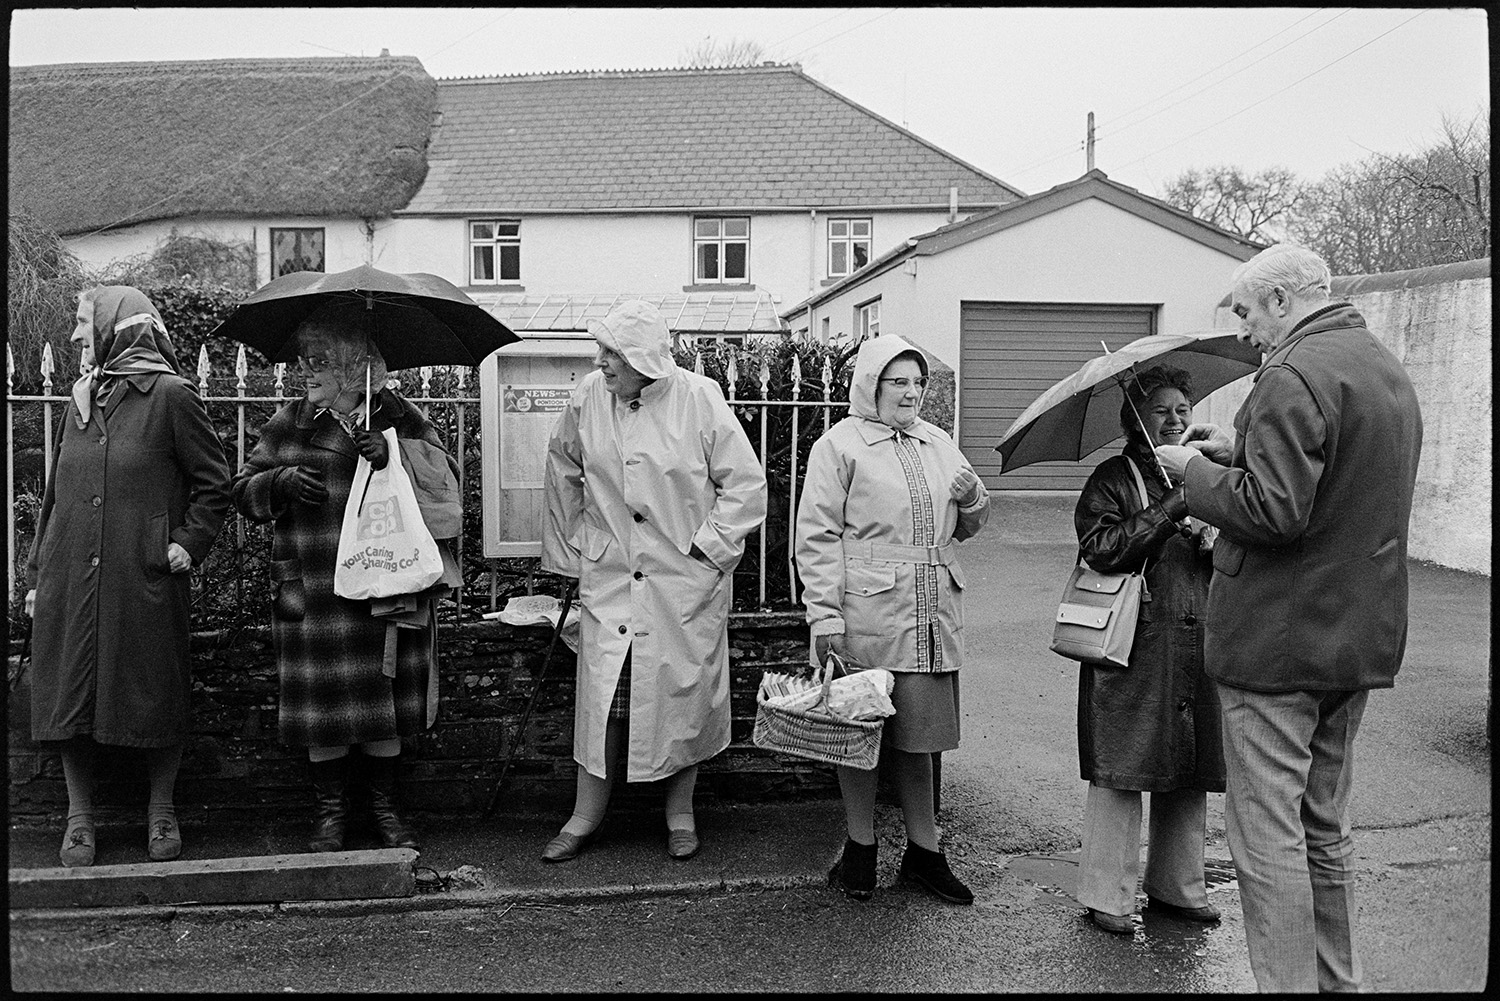 Getting ready for Pancake race in village street and having race. 
[Women and a man lining a street in Dolton to watch the pancake race on Shrove Tuesday. They are wearing rain coats and holding umbrellas.]